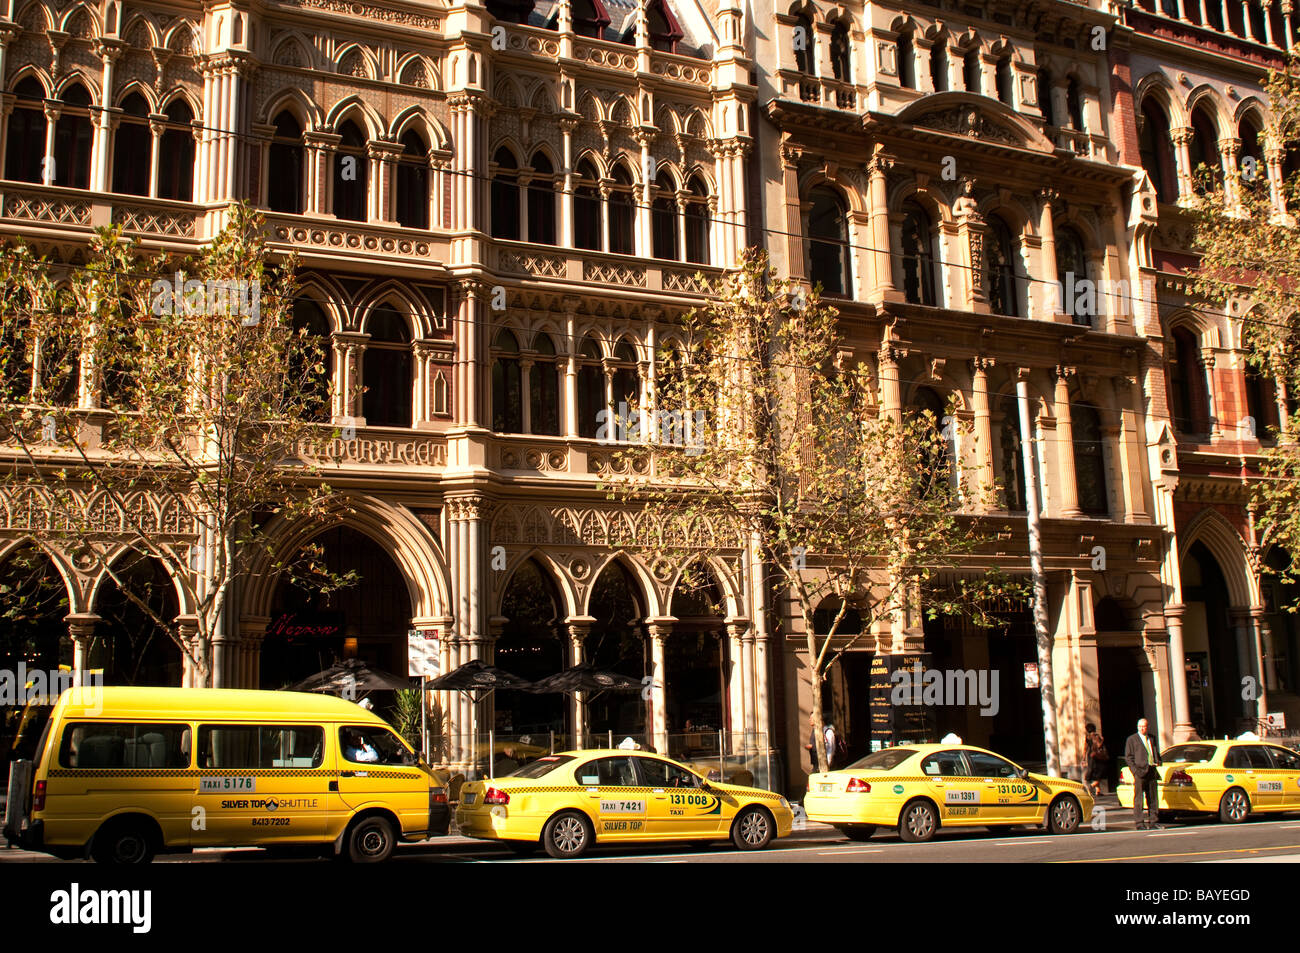 Taxis lined up in front of the old Rialto Hotel on Collins Street, Melbourne, Australia Stock Photo